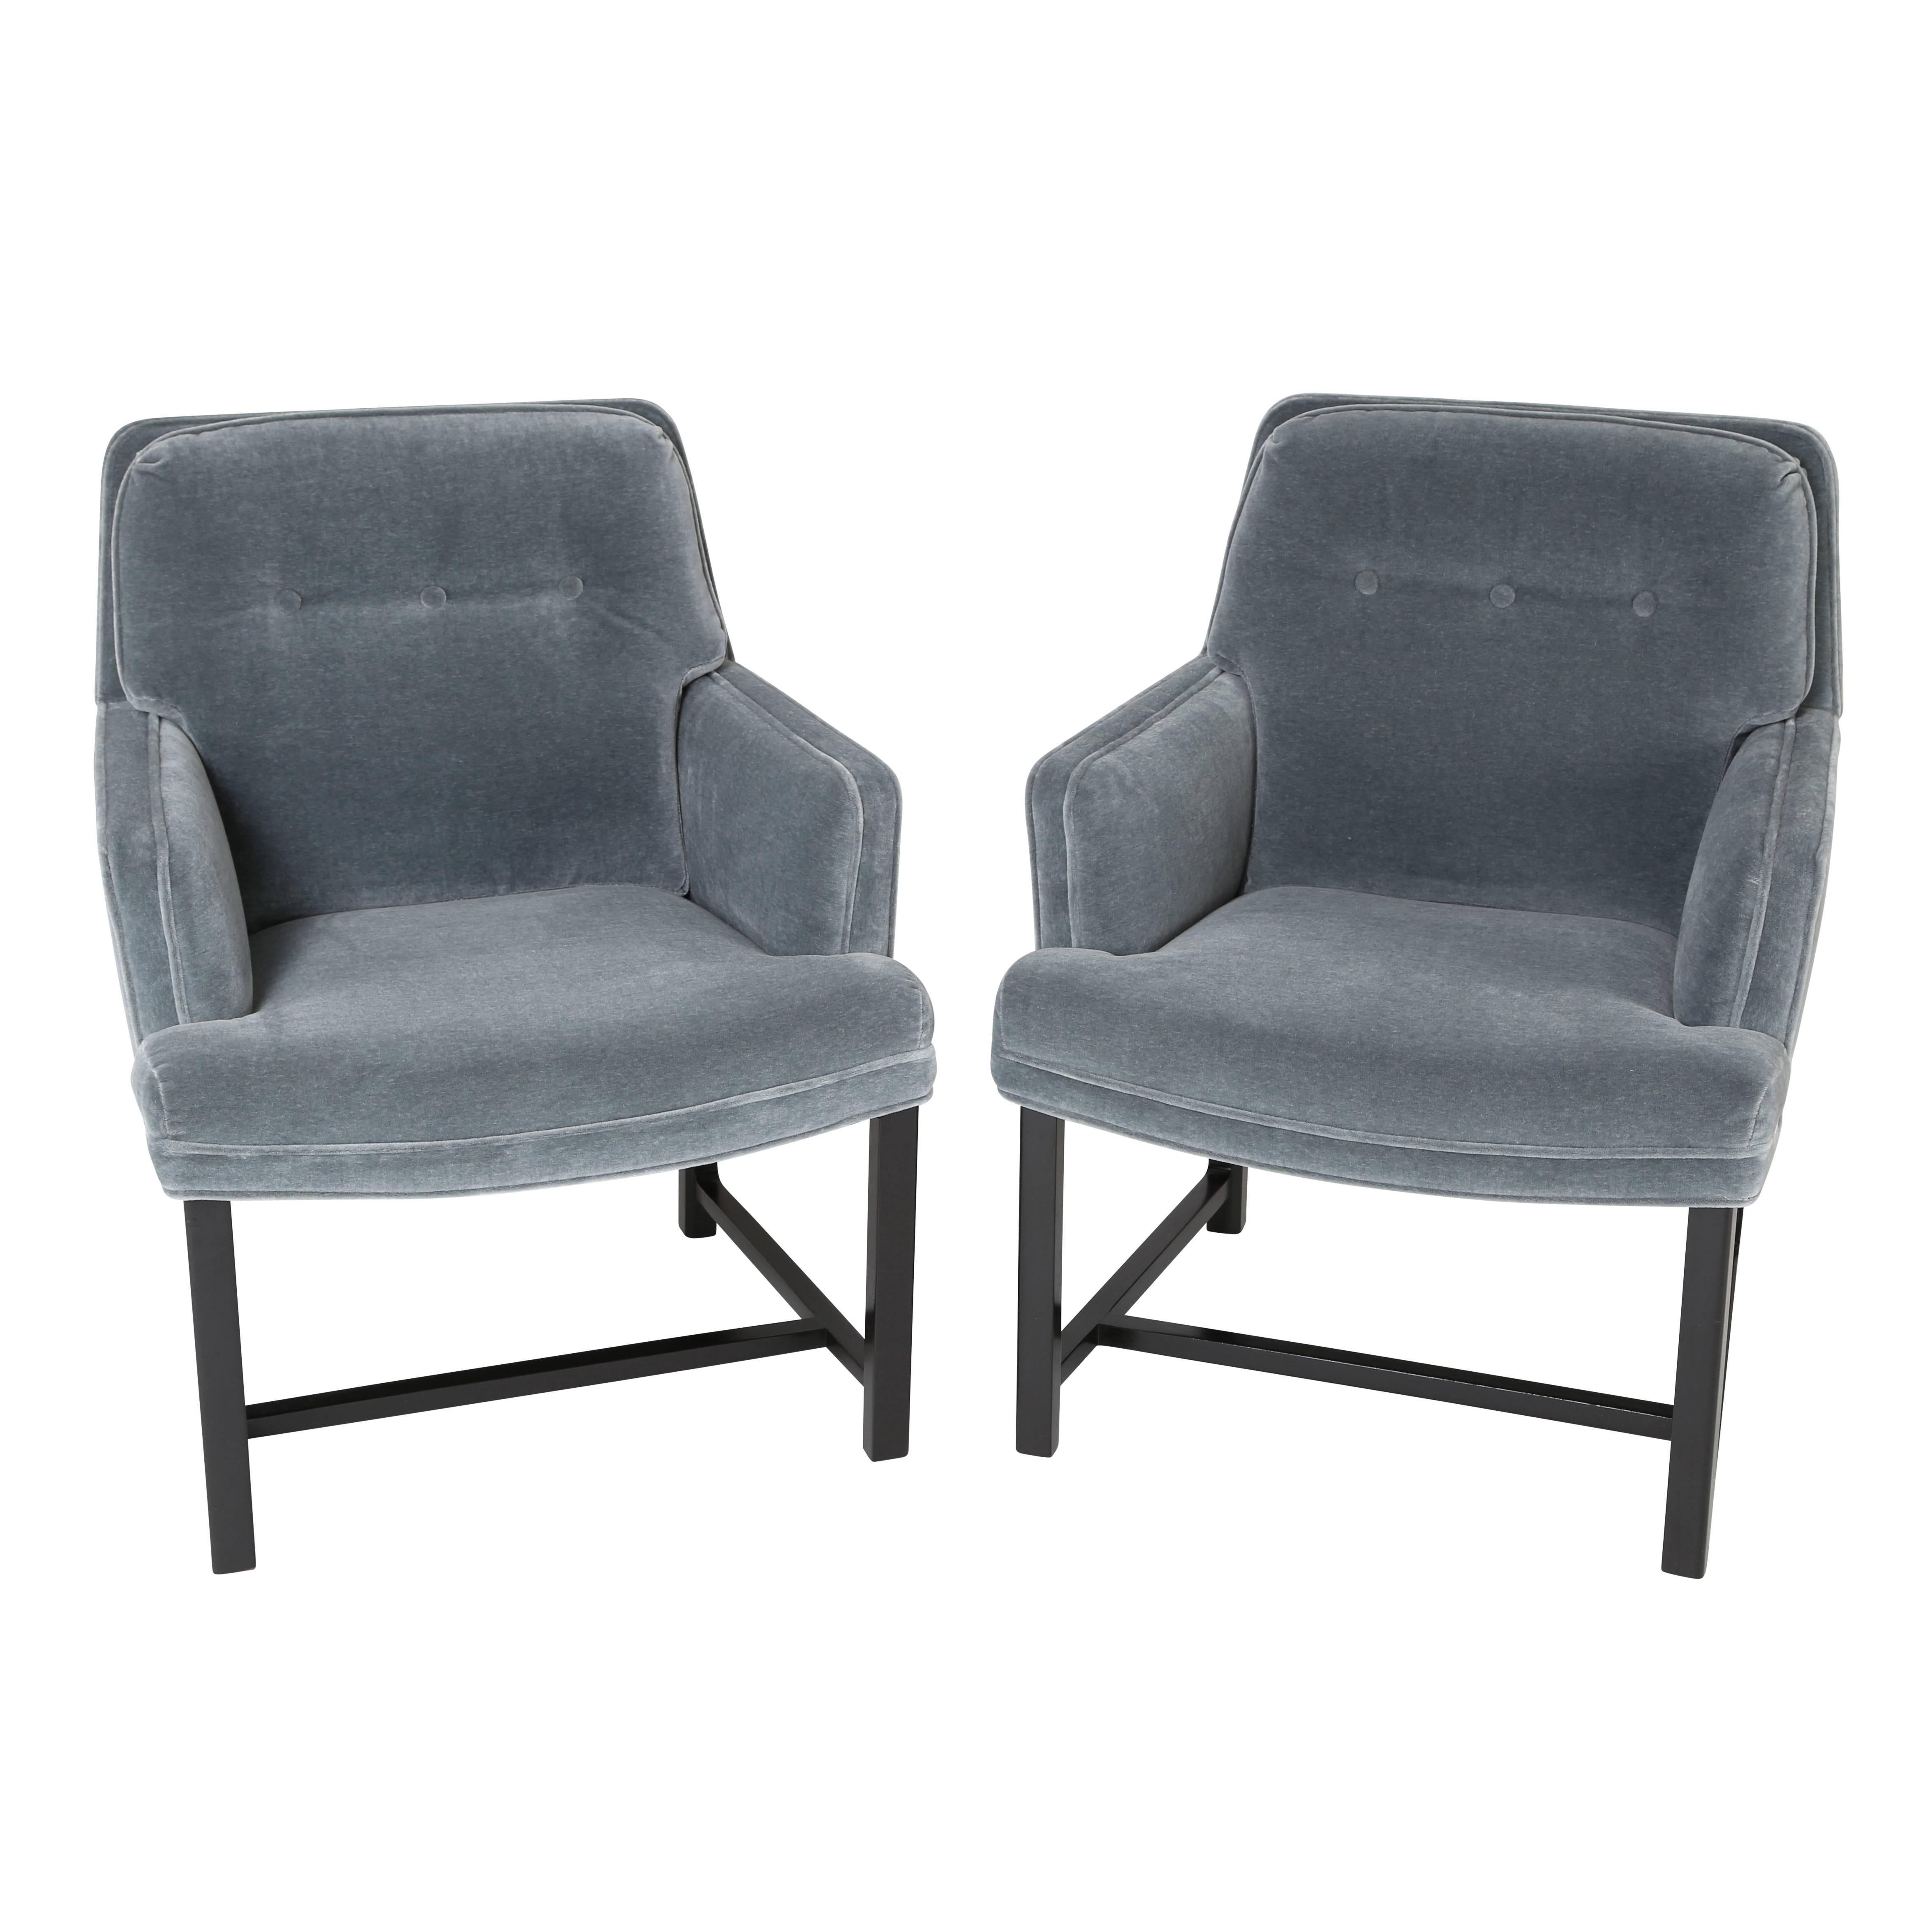 This fine pair of armchairs designed by Edward Wormley reflects Dunbar's signature high-quality construction. Sturdy and versatile, these chairs have been professionally refinished and newly reupholstered in a grey-blue mohair velvet. 28